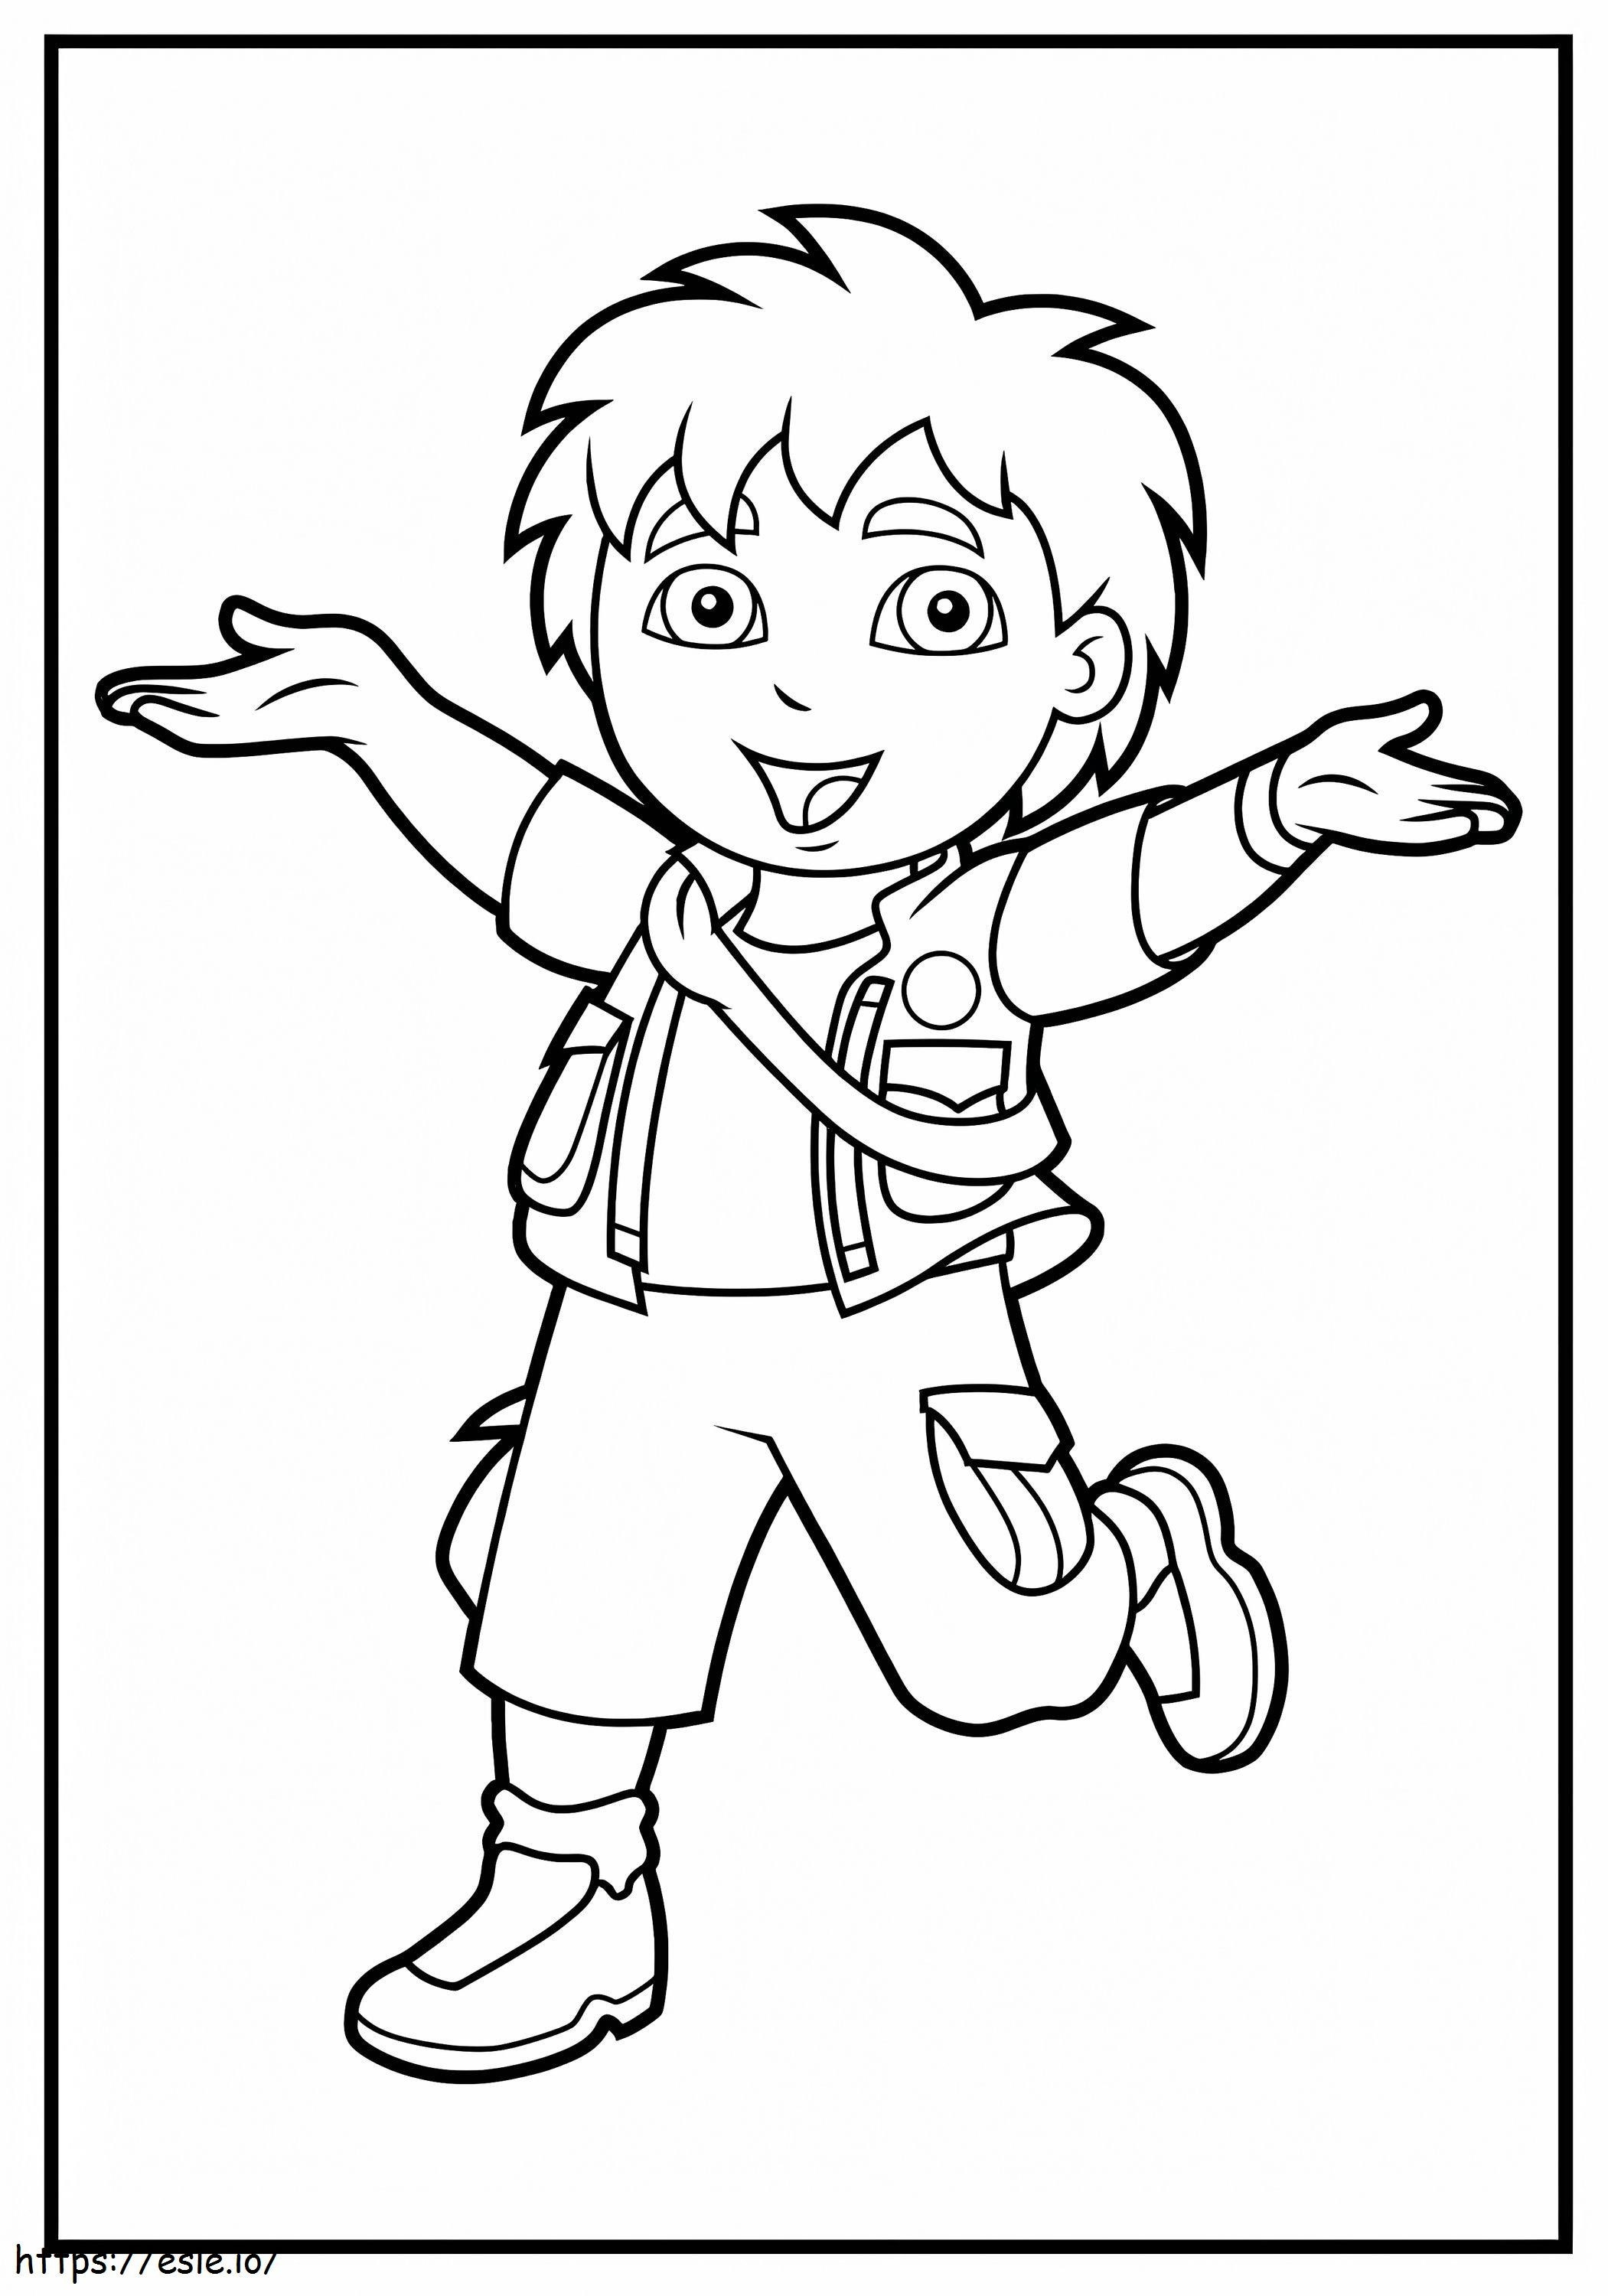 Funny Diego coloring page